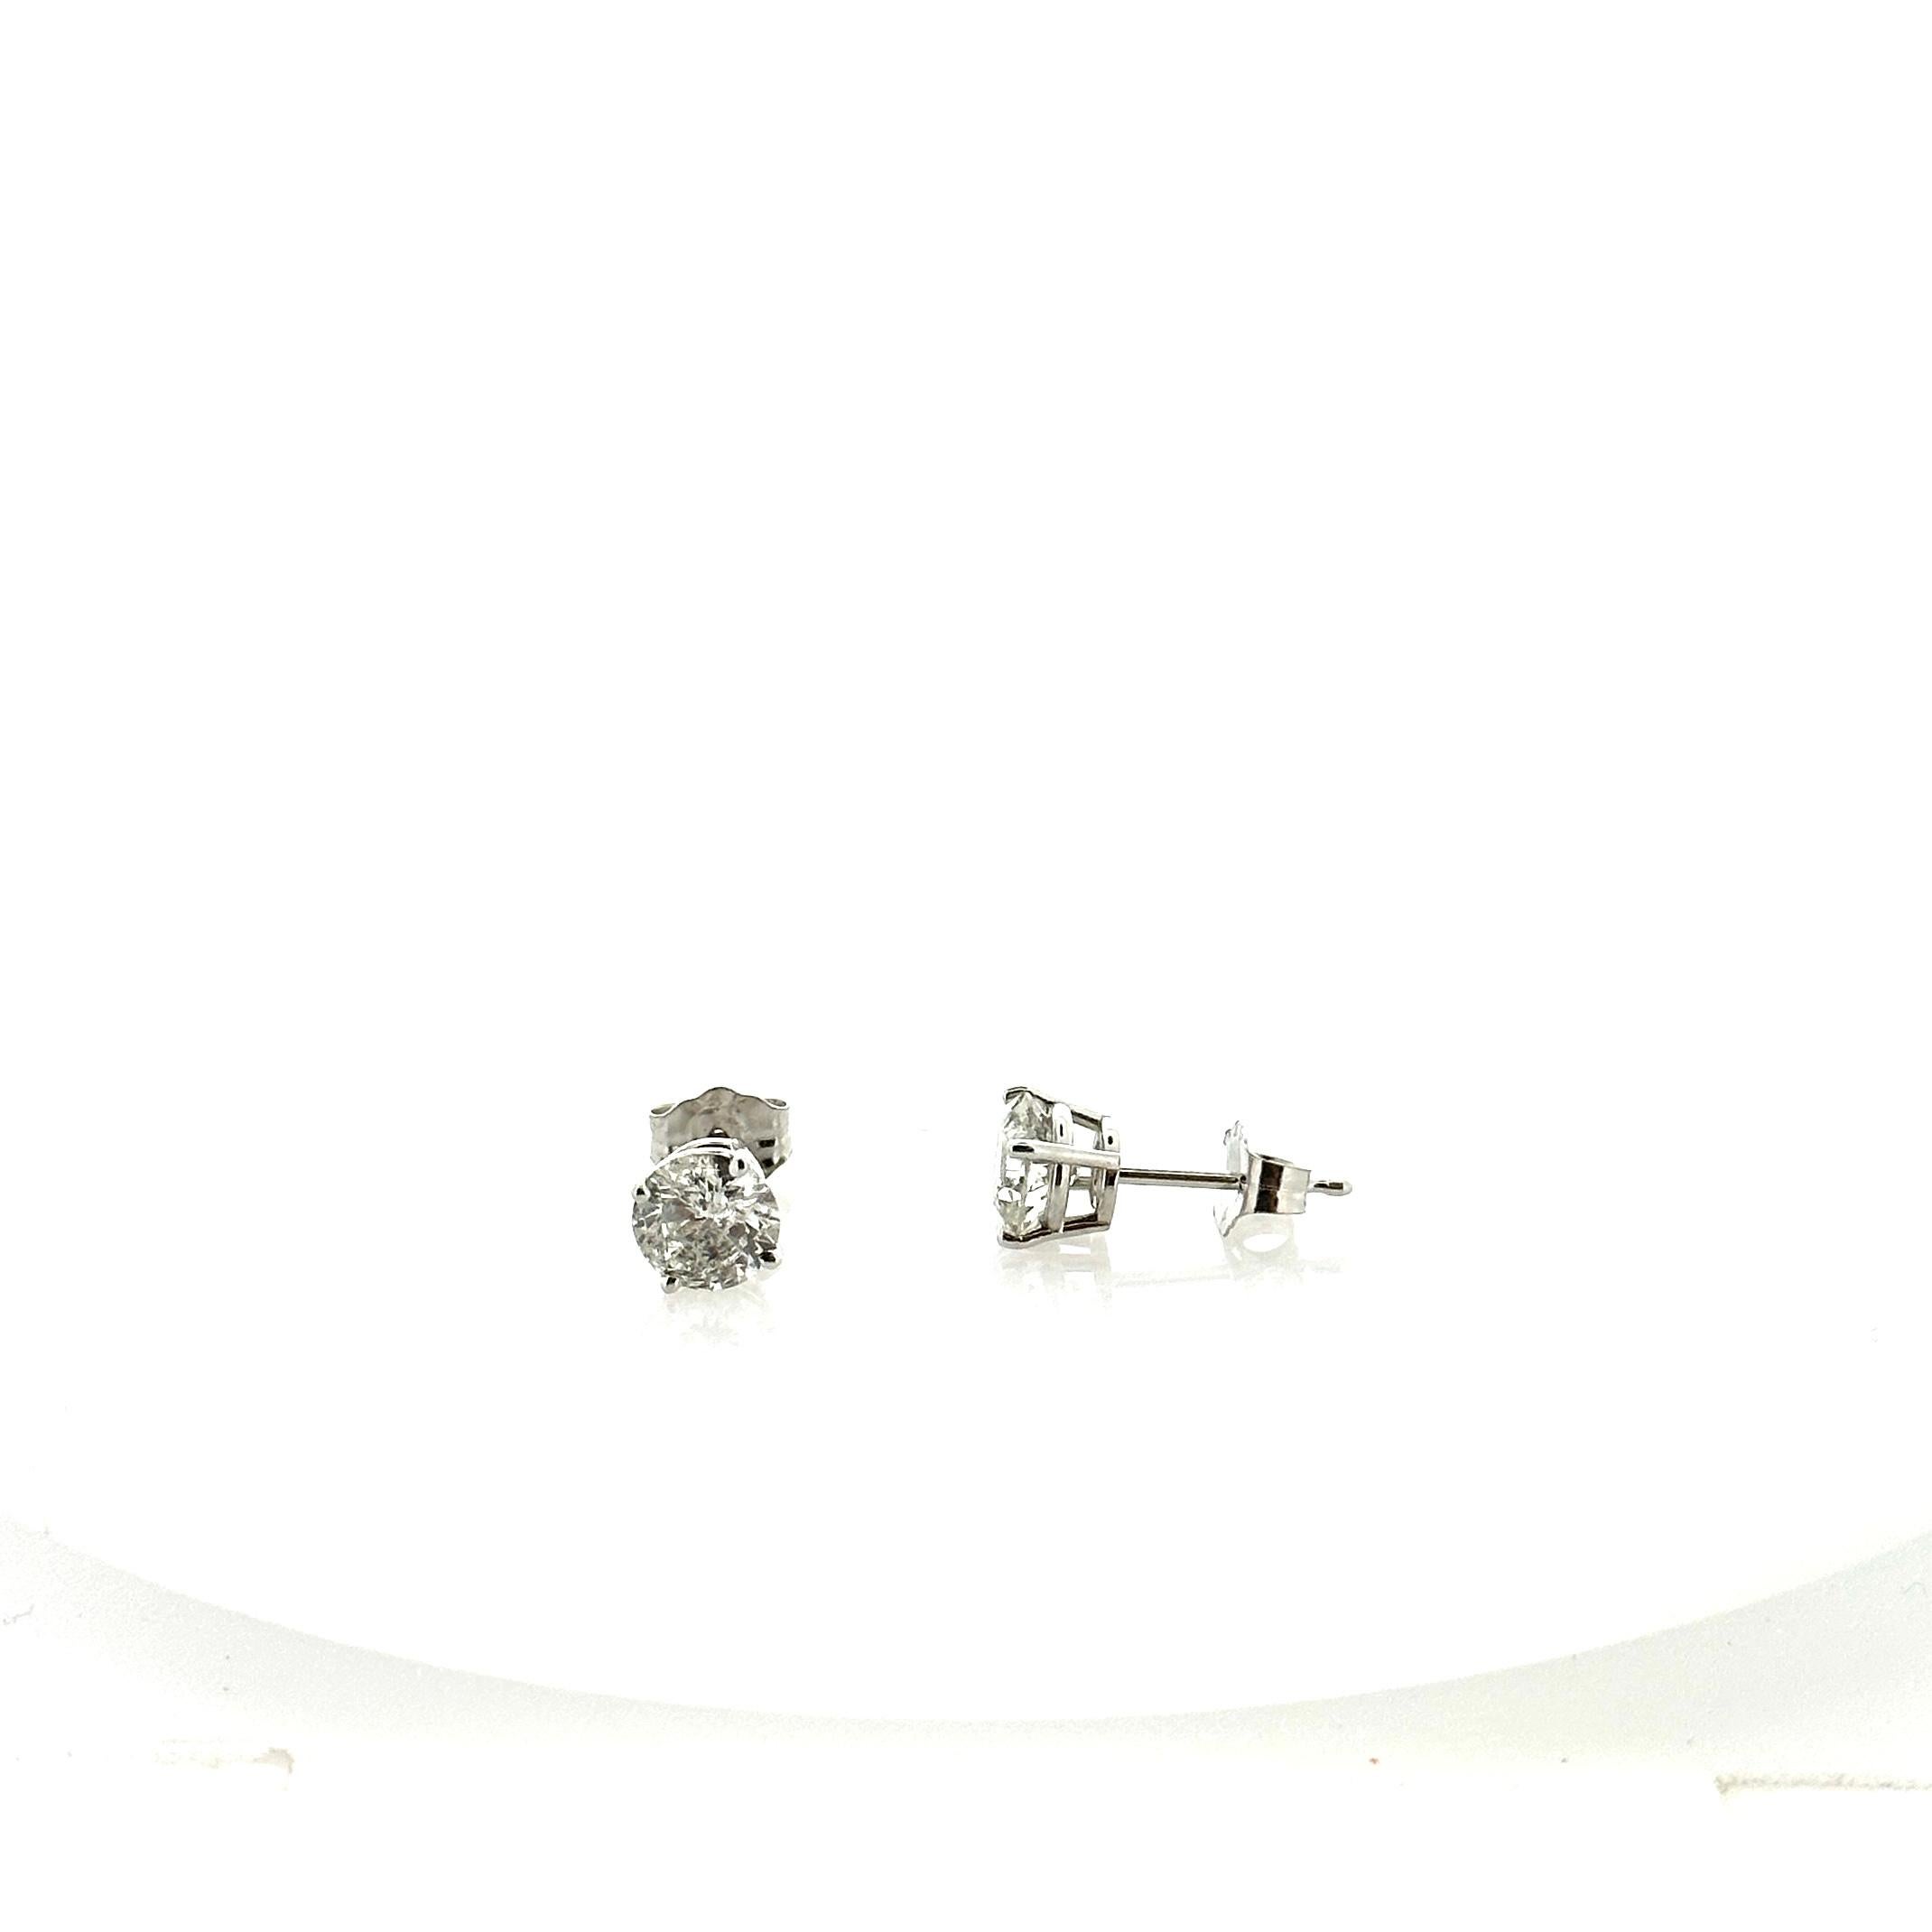 Stunning 14 Karat white gold handmade earrings featuring 2 round brilliant cut diamonds weighing 1.25 carat total I-J color and SI1 clarity. These gorgeous earrings are classic and timelessly elegant.